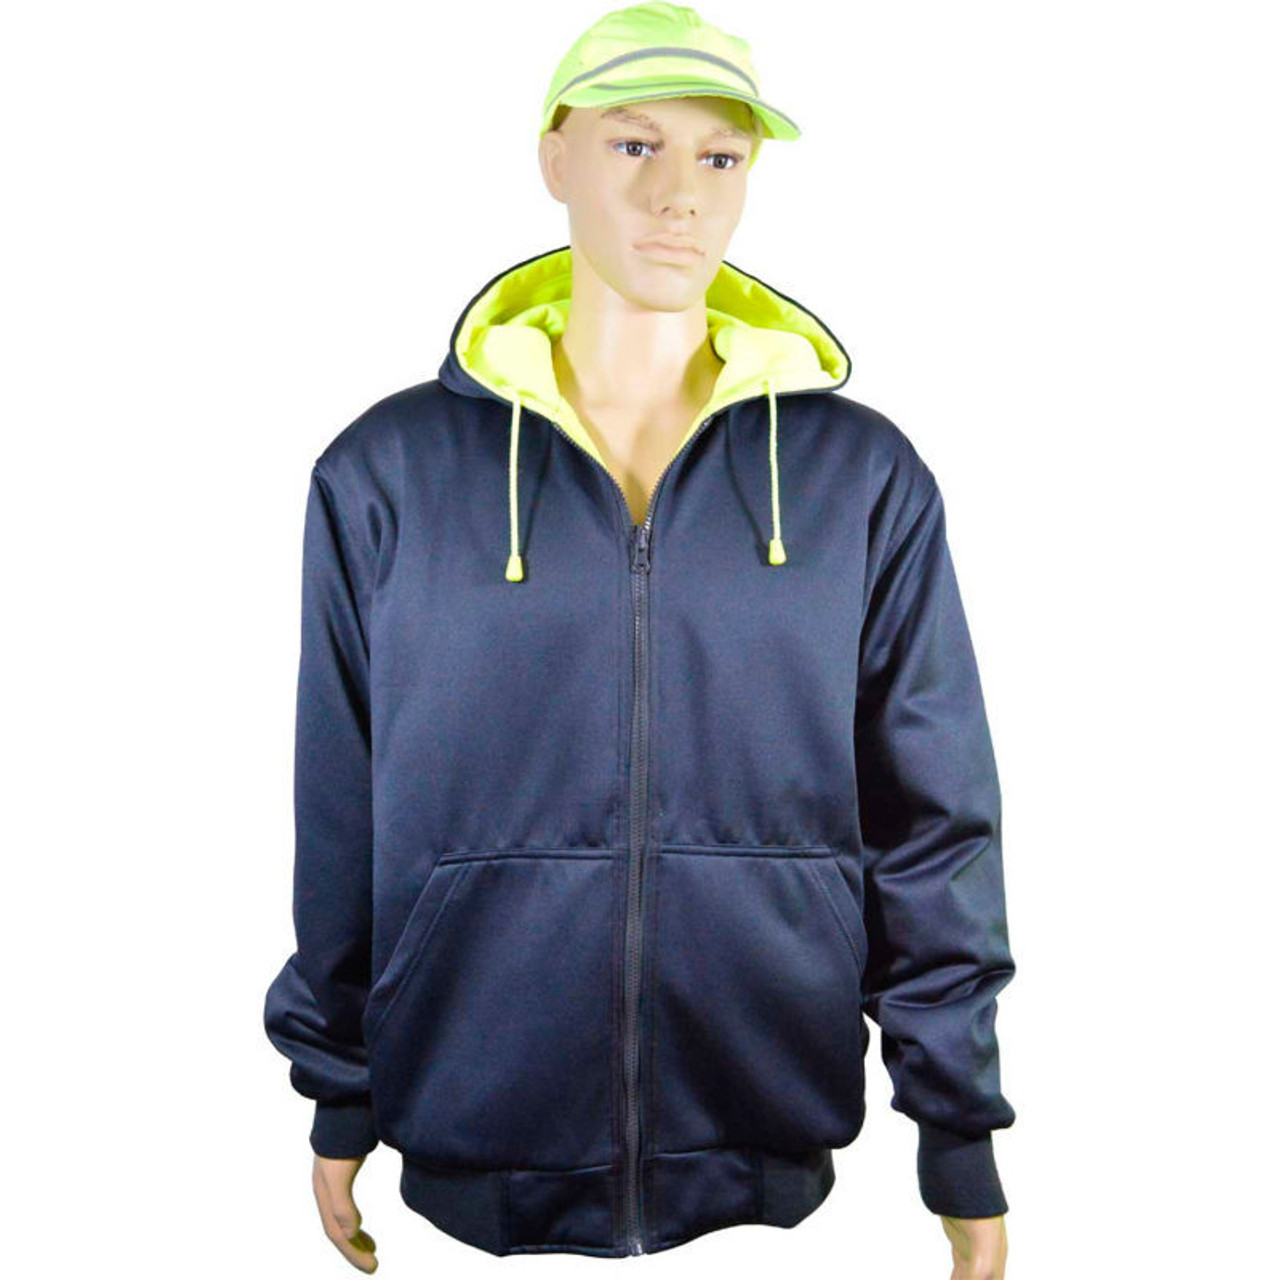 Double Weight (20 Oz.) Lime/Navy Reversible ANSI Class 3 Zip-Up Hooded Sweatshirt